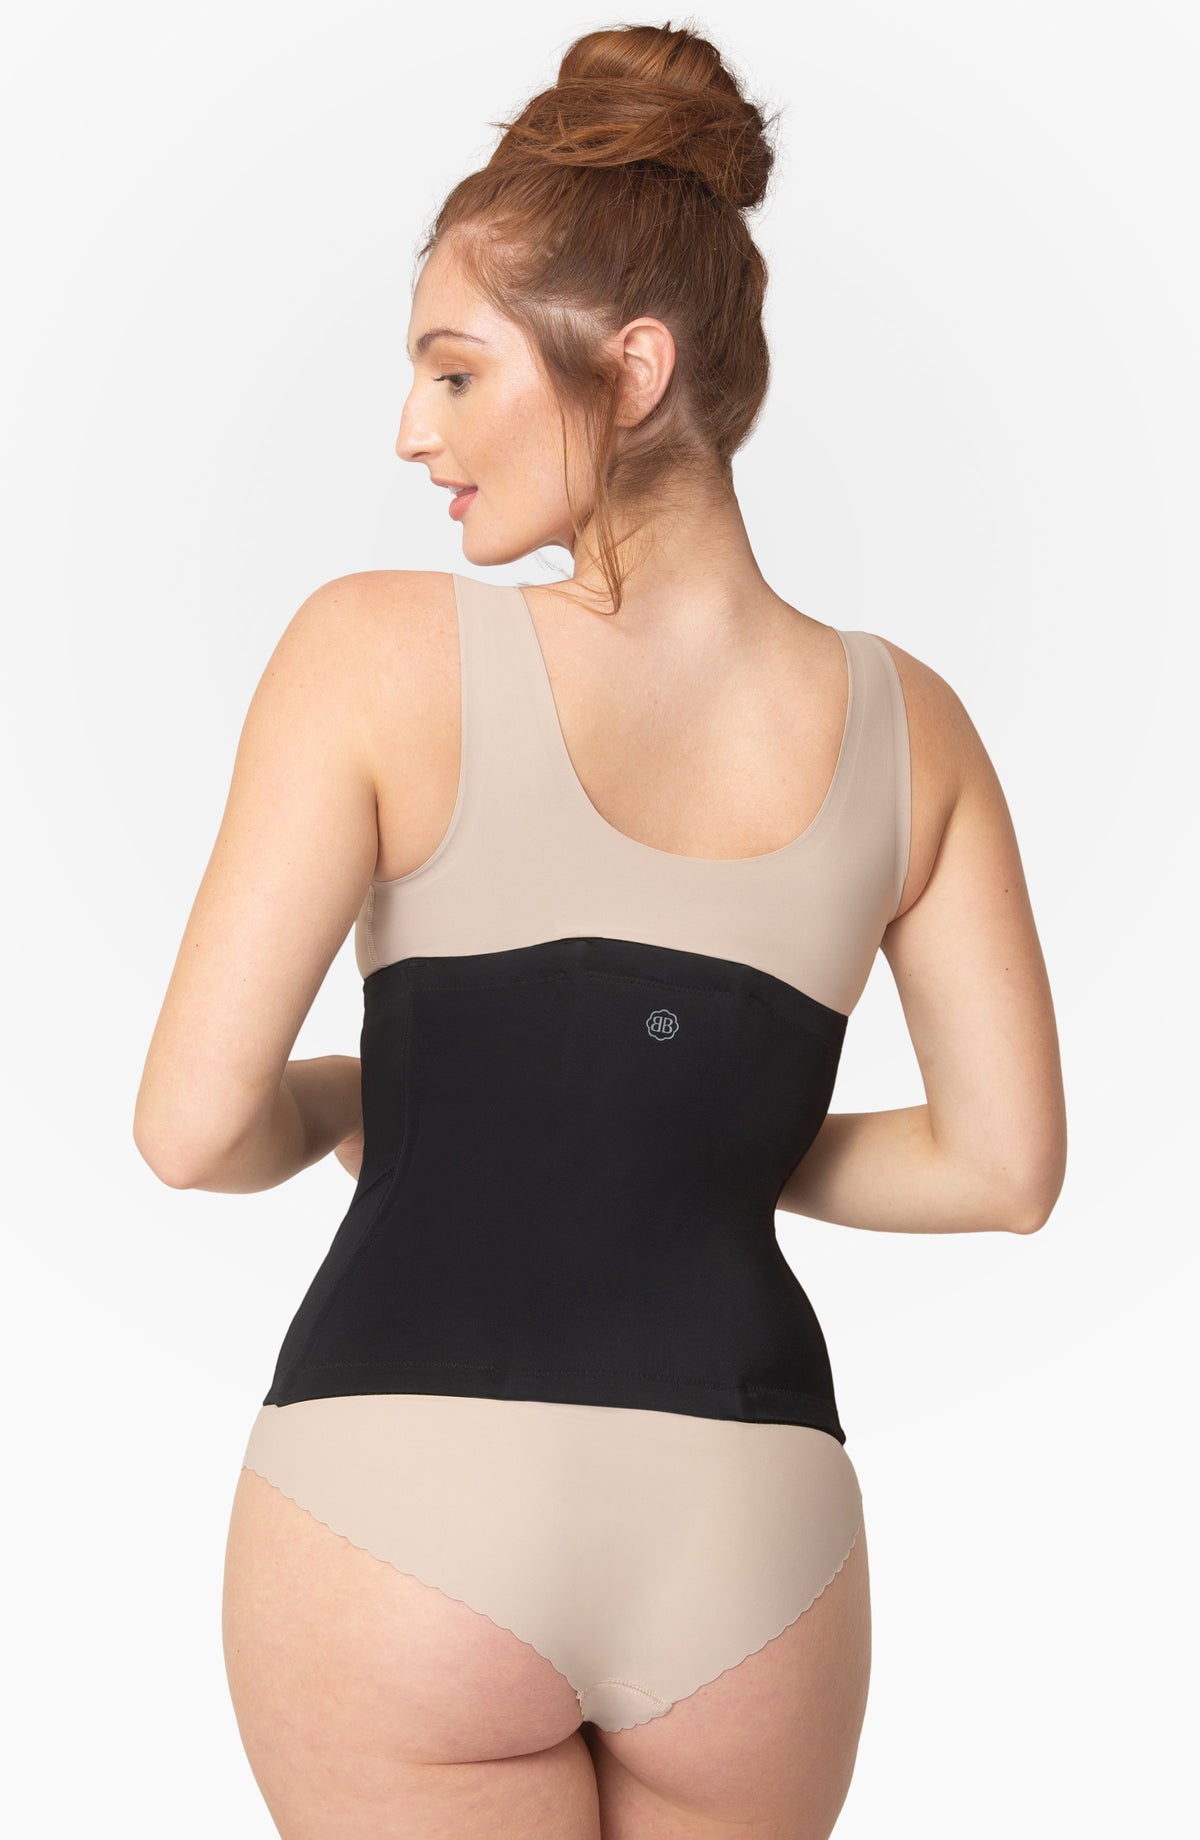 Belly Bandit Women's BFF Wrap with Adjustable Corset-Inspired Design, Back  Support Shapewear for Postpartum Recovery (Cream)